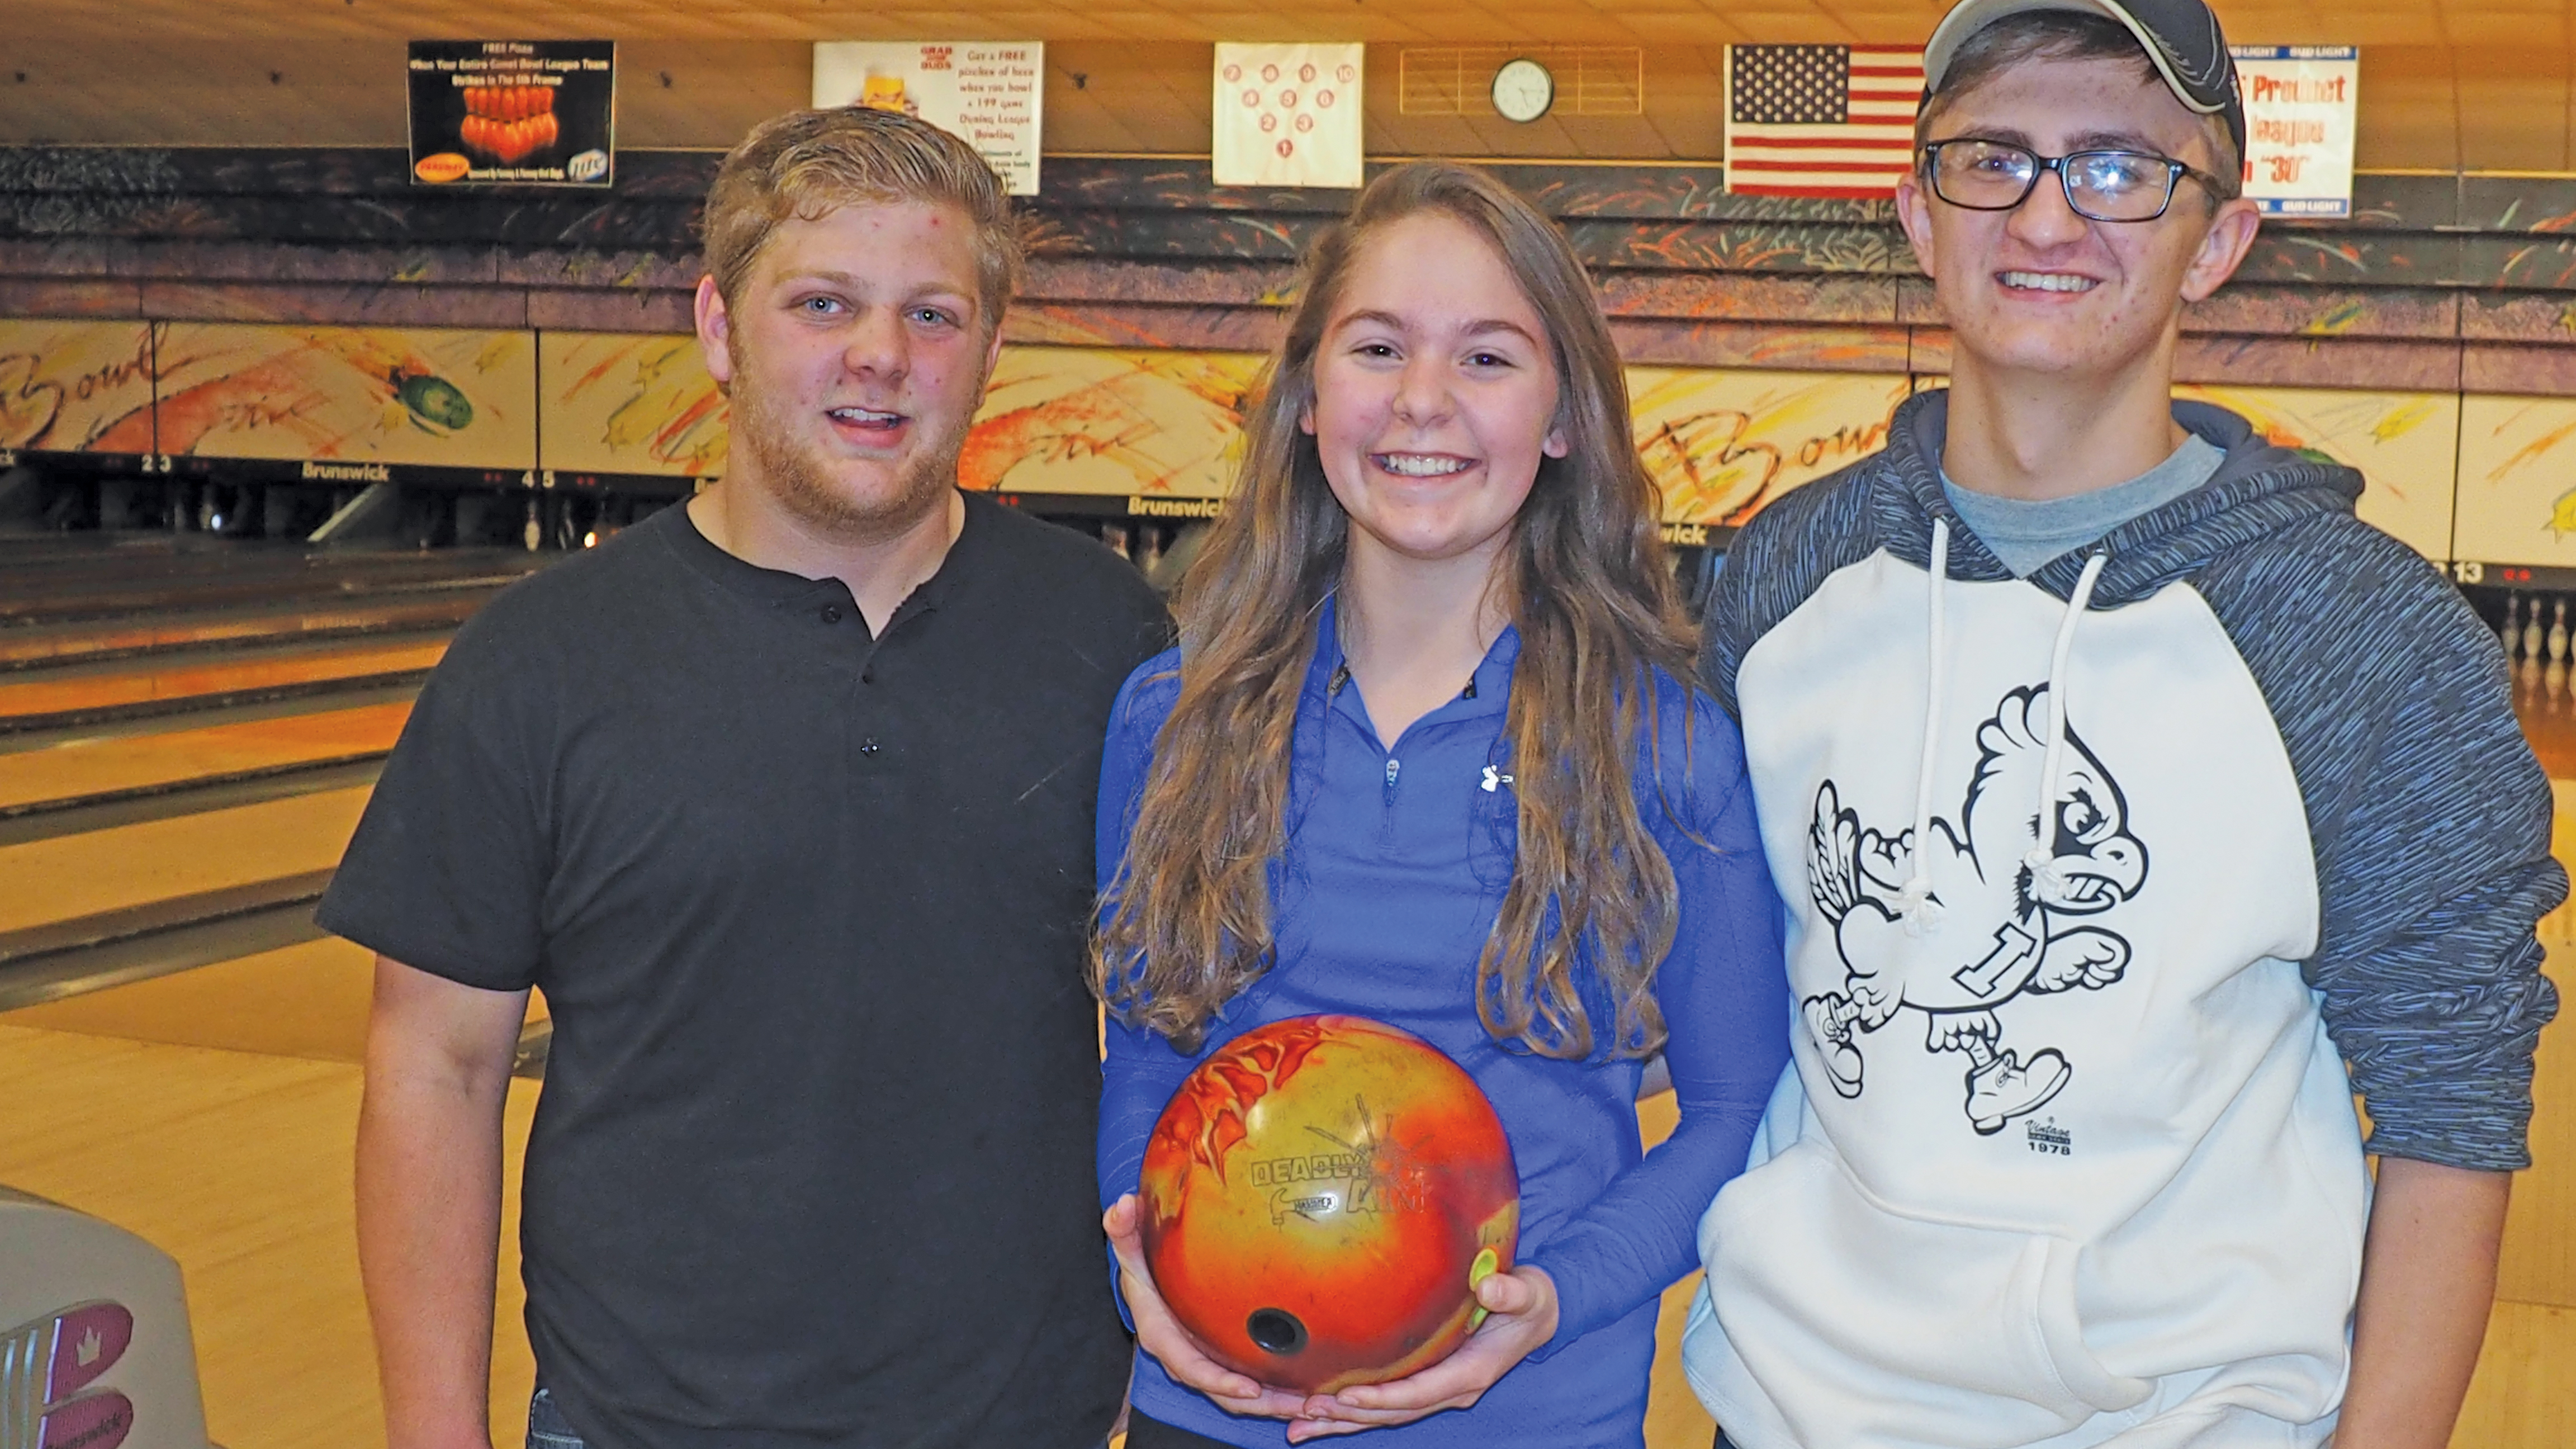 Comet bowlers ready to roll